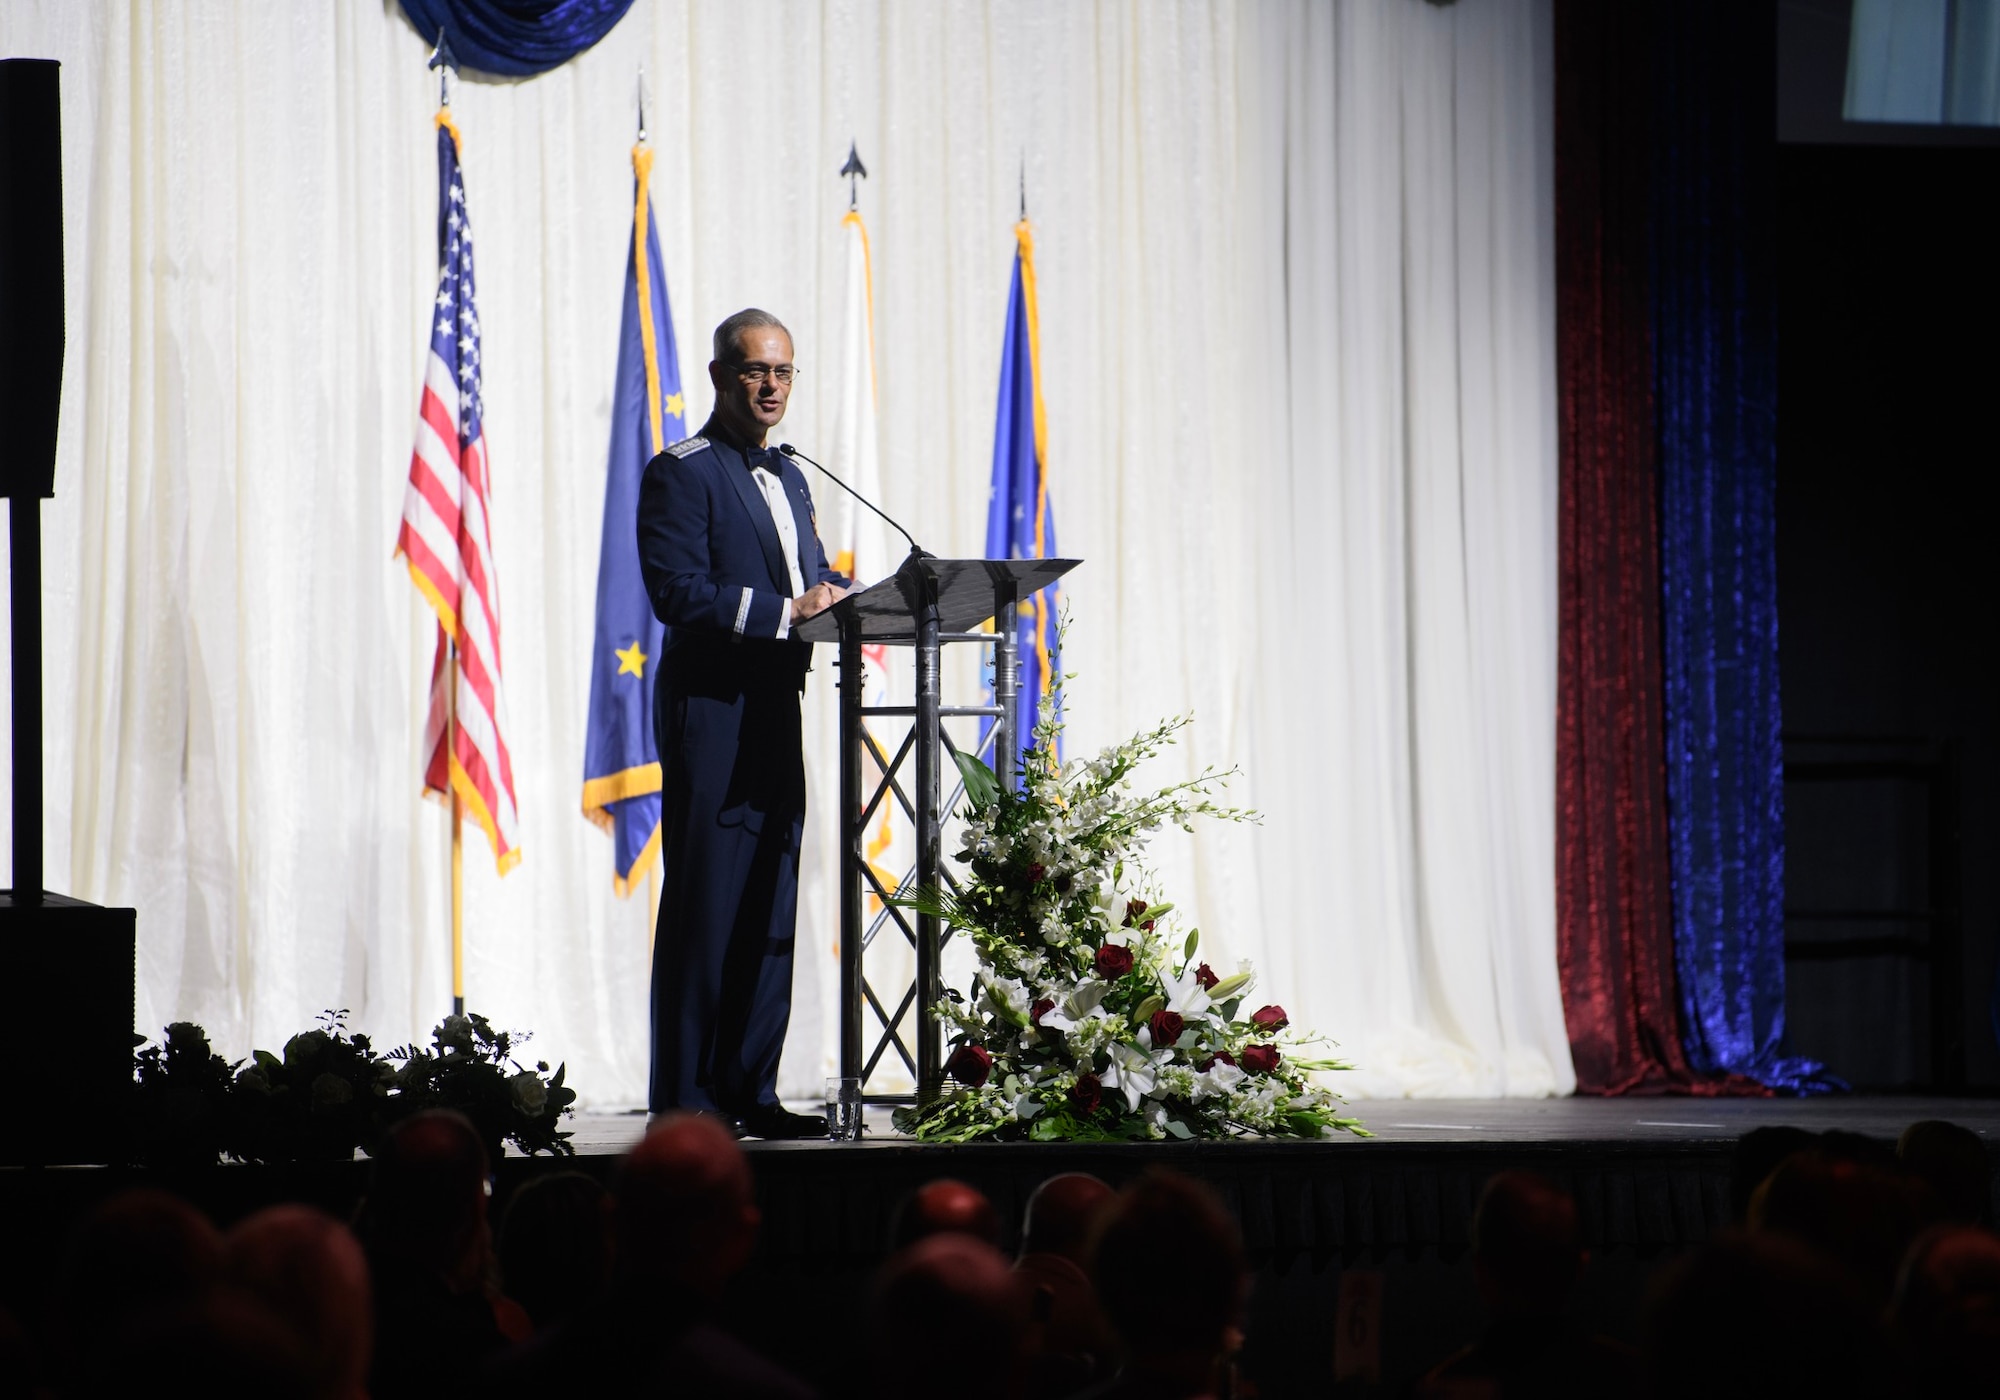 commander of Pacific Air Forces, The Air Component Commander of U.S. Indo-Pacific Command, and the executive director of Pacific Air Combat Operation, speaks as the distinguished guest speaker during the Fairbanks Chamber of Commerce Military Appreciation Banquet.